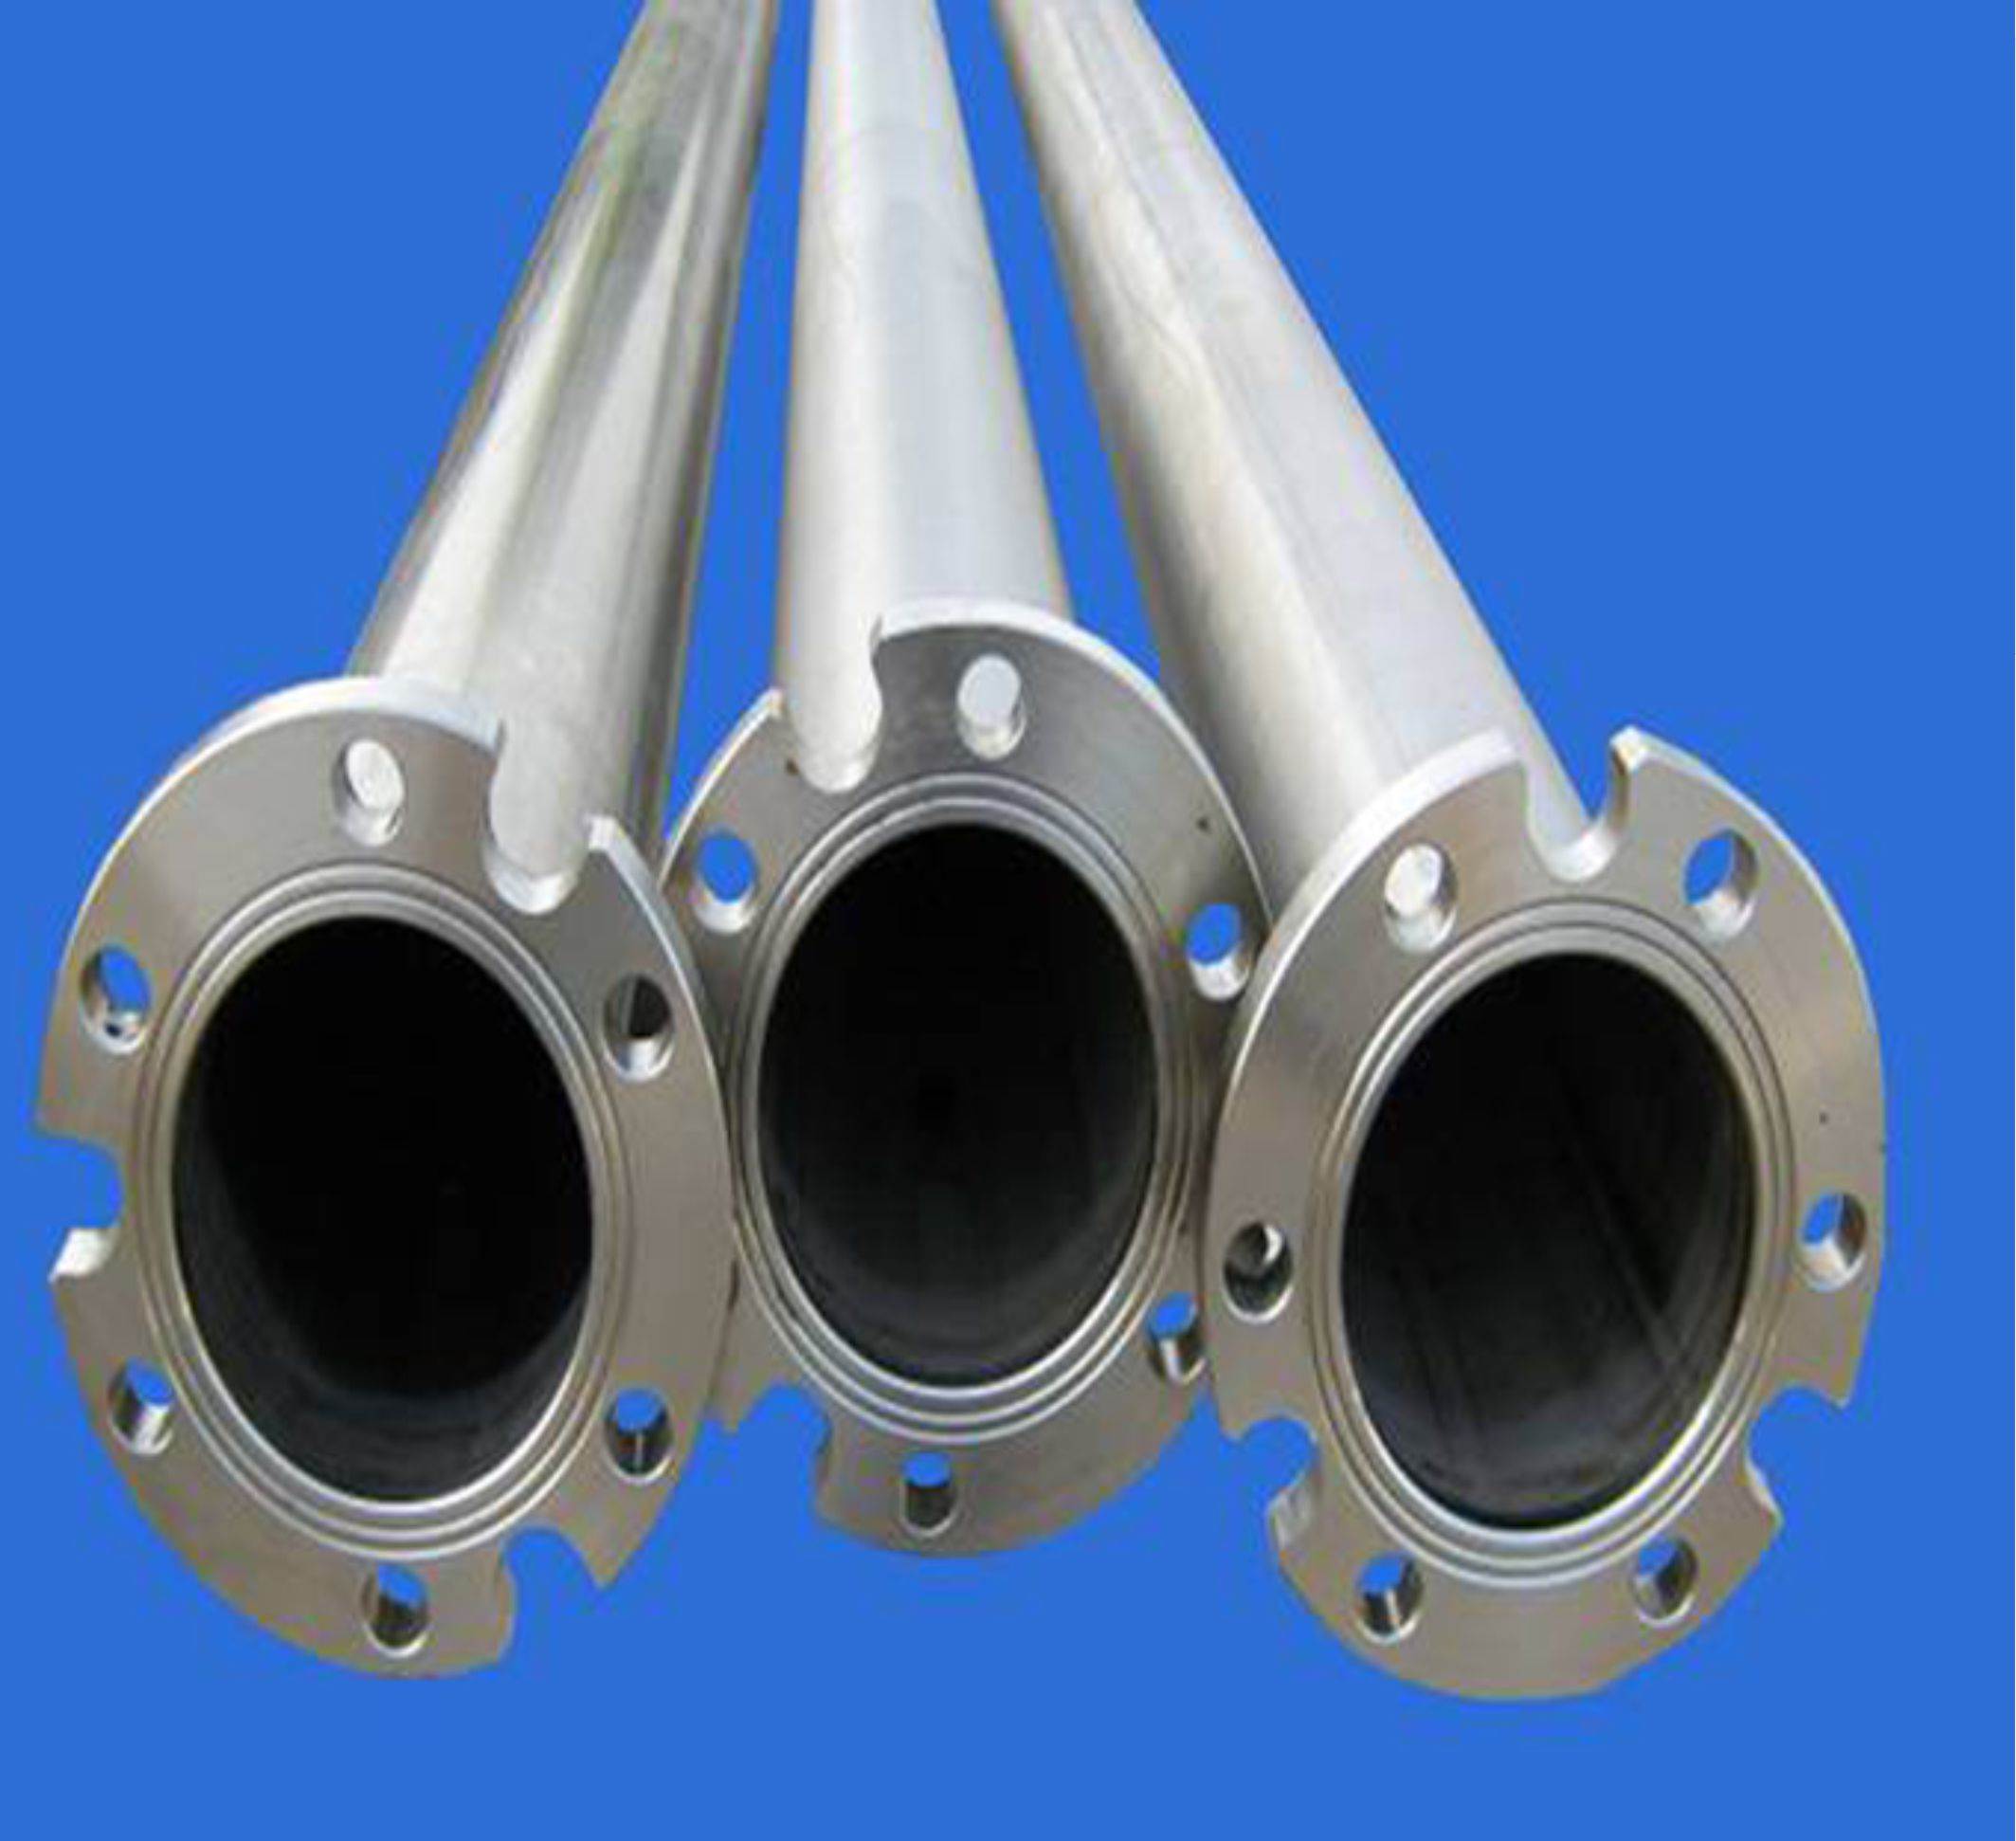 Rizer pipe manufacturer and supplier